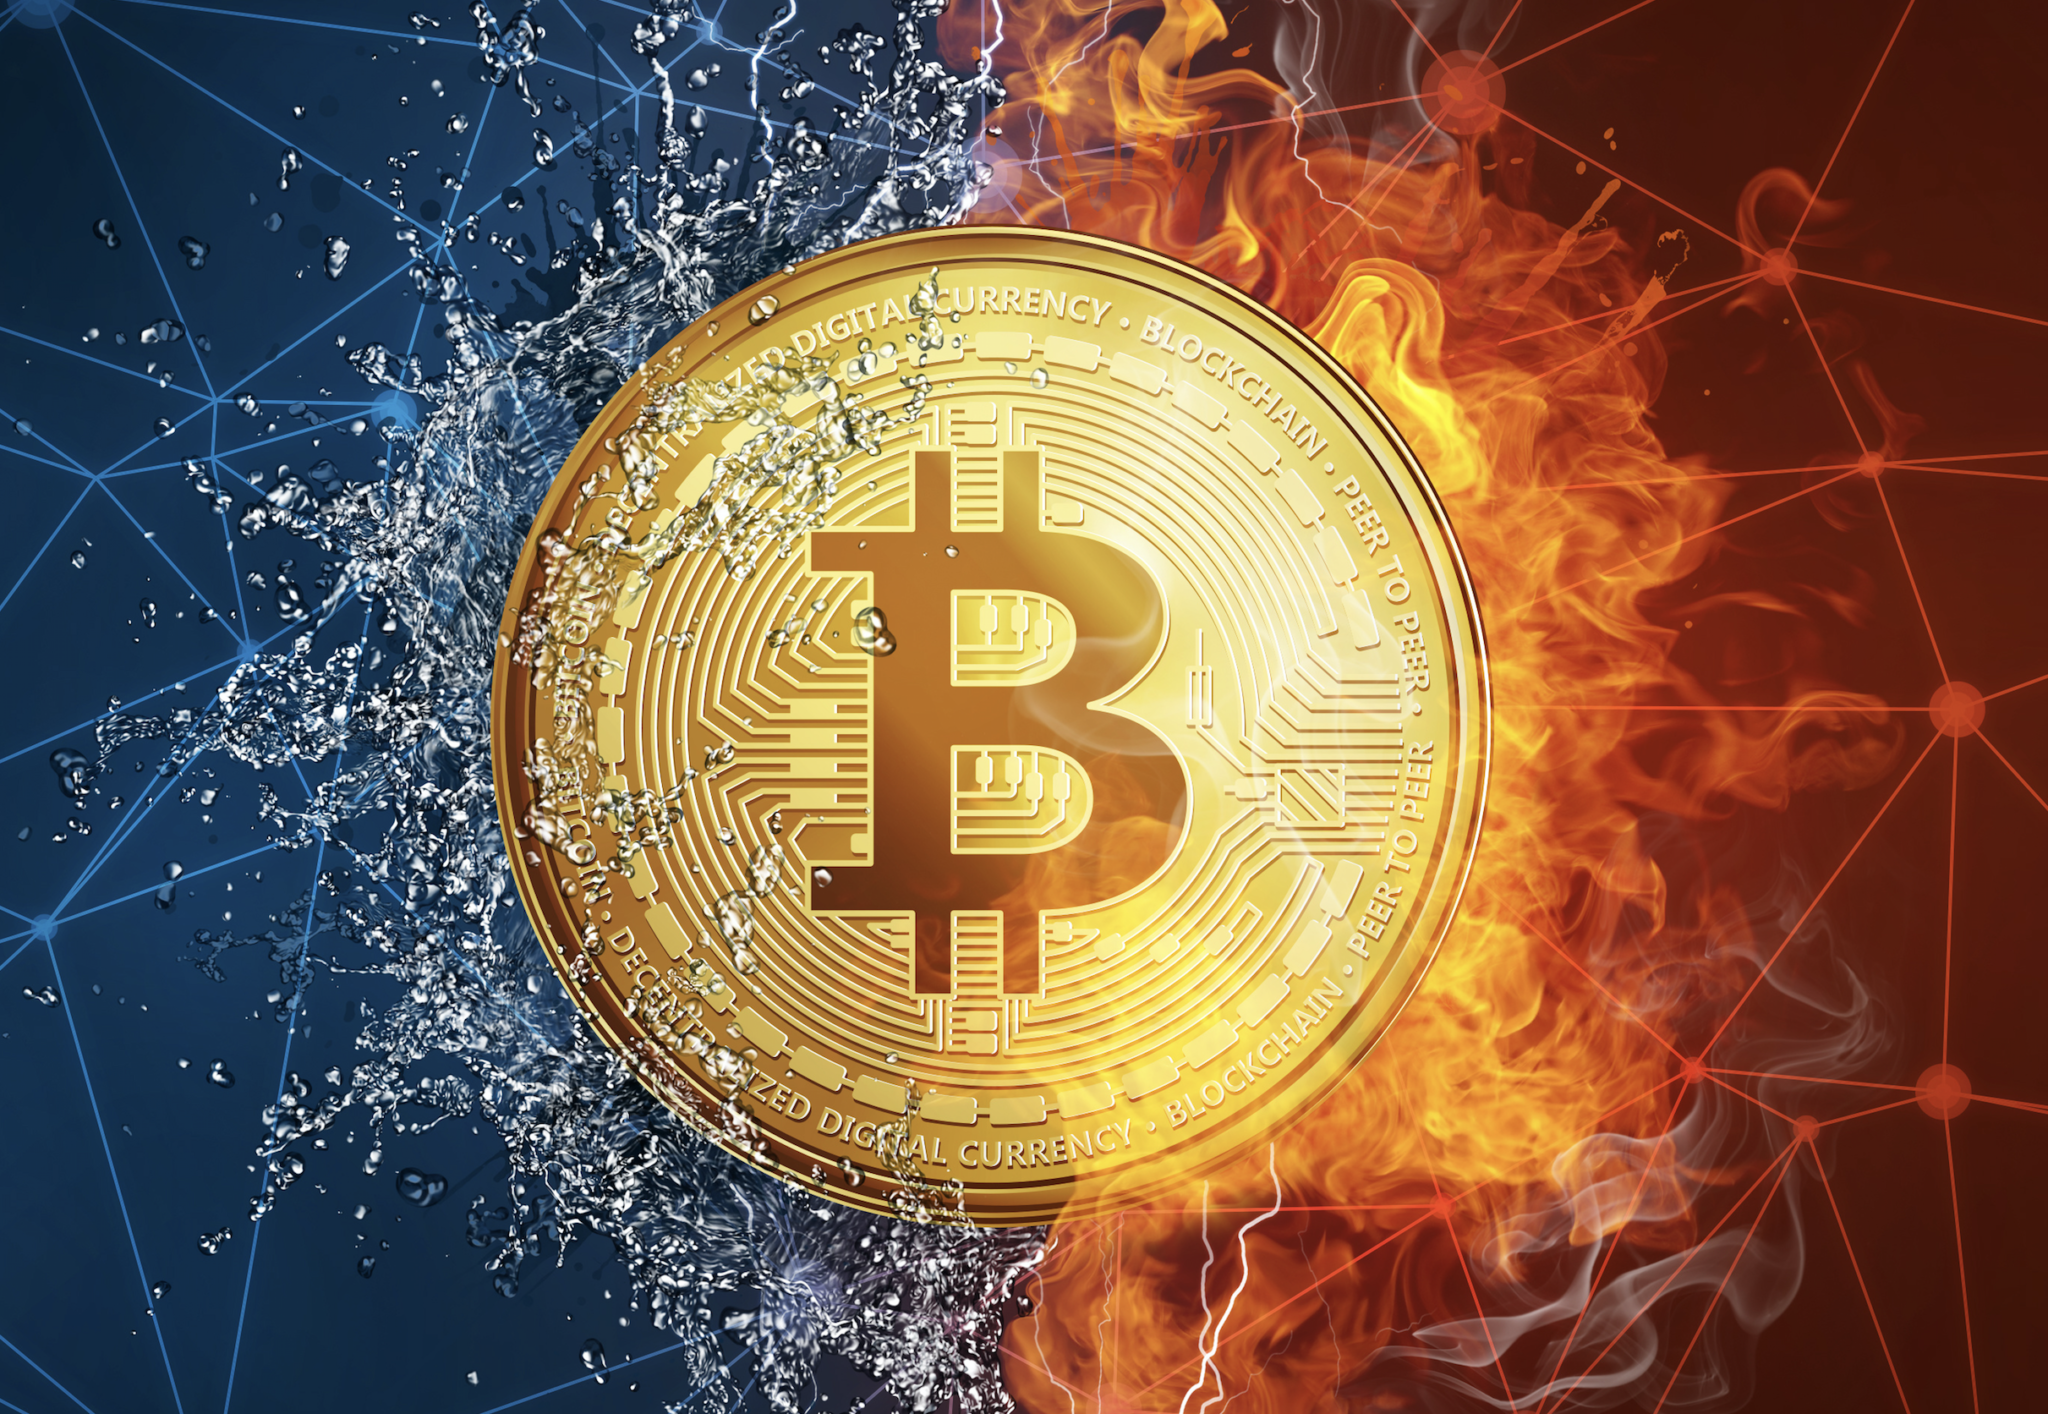 Bitcoin (BTC) Drops to its Lowest Price in 12 Months